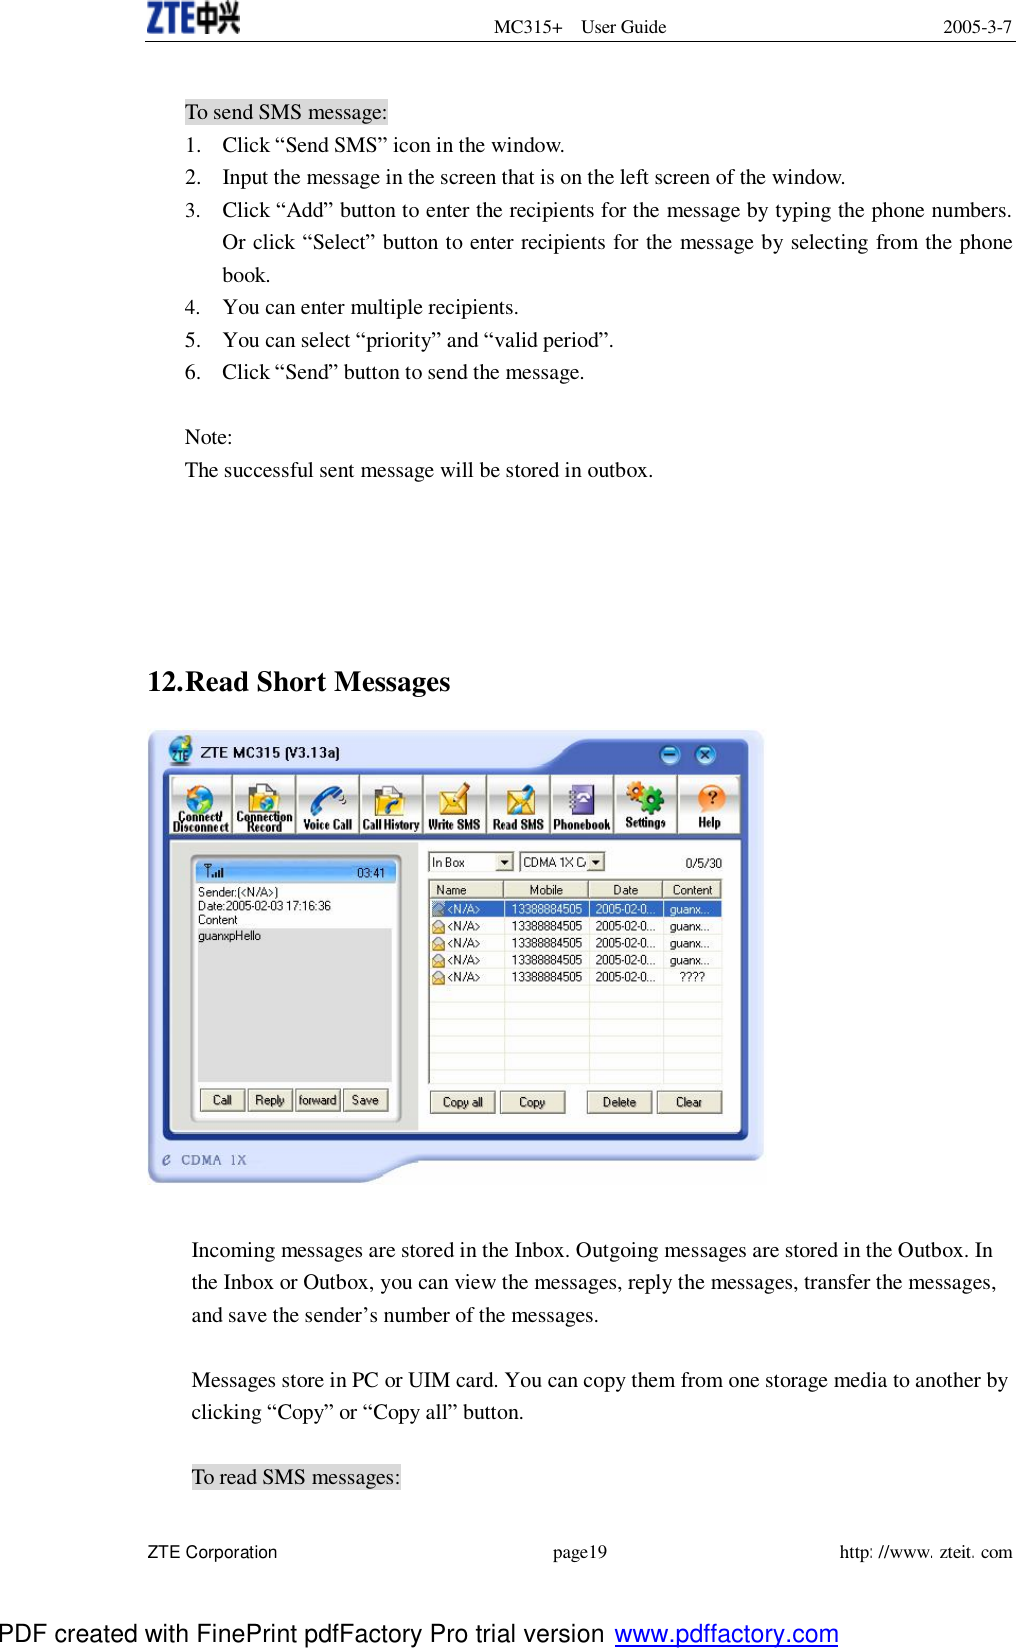  MC315+ User Guide 2005-3-7  ZTE Corporation page19 http://www.zteit.com  To send SMS message: 1. Click “Send SMS” icon in the window. 2. Input the message in the screen that is on the left screen of the window. 3. Click “Add” button to enter the recipients for the message by typing the phone numbers. Or click “Select” button to enter recipients for the message by selecting from the phone book. 4. You can enter multiple recipients. 5. You can select “priority” and “valid period”. 6. Click “Send” button to send the message.  Note: The successful sent message will be stored in outbox.      12. Read Short Messages   Incoming messages are stored in the Inbox. Outgoing messages are stored in the Outbox. In the Inbox or Outbox, you can view the messages, reply the messages, transfer the messages, and save the sender’s number of the messages.  Messages store in PC or UIM card. You can copy them from one storage media to another by clicking “Copy” or “Copy all” button.   To read SMS messages: PDF created with FinePrint pdfFactory Pro trial version www.pdffactory.com